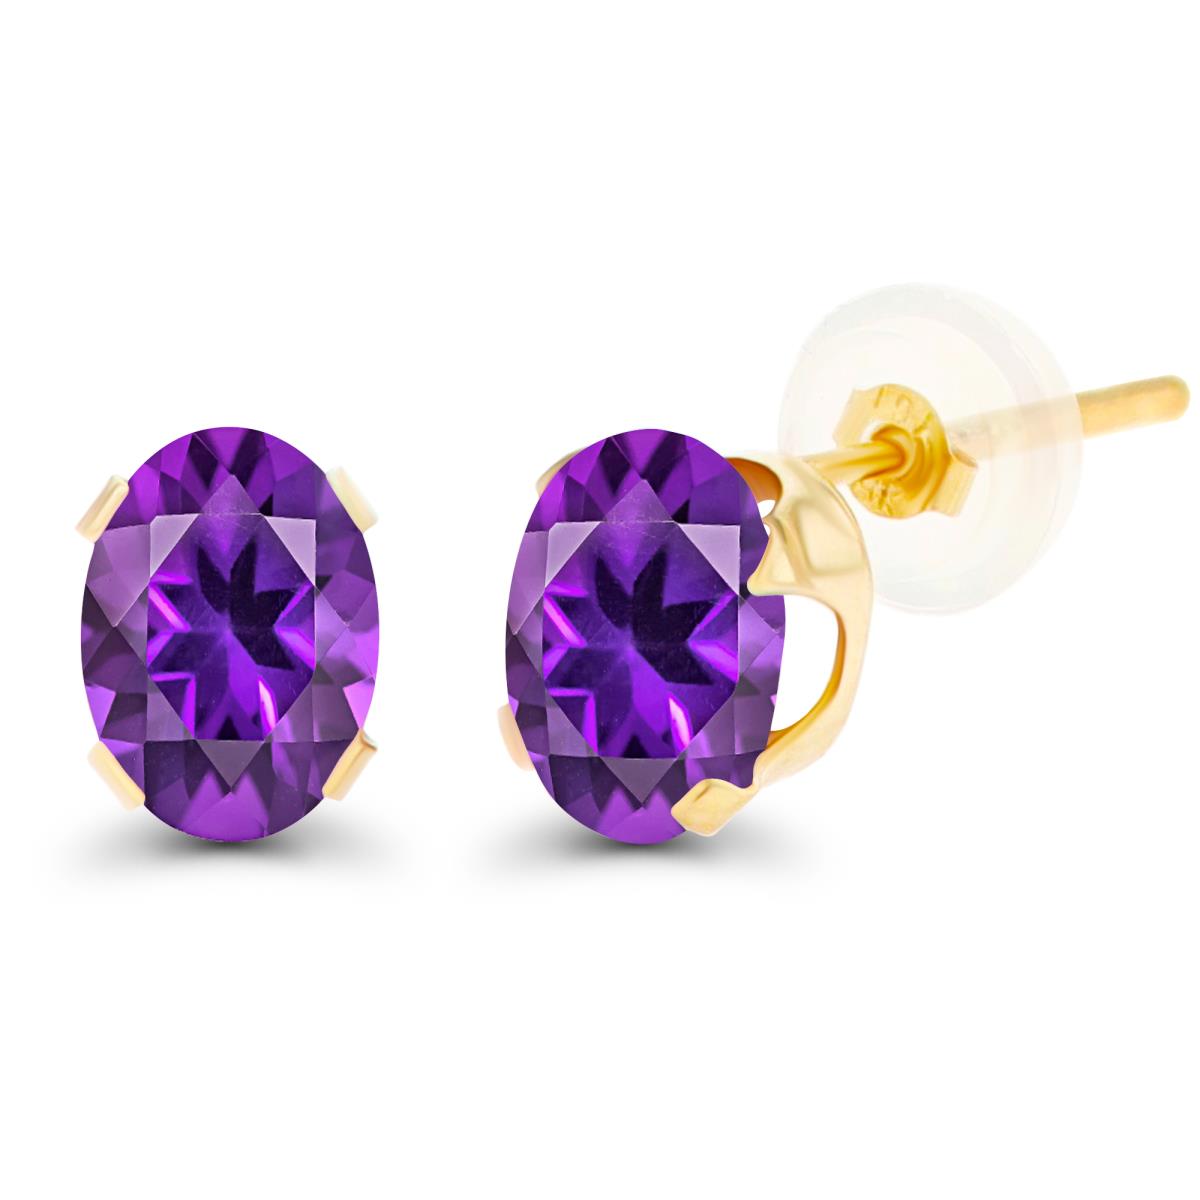 10K Yellow Gold 7x5mm Oval Amethyst Stud Earring with Silicone Back